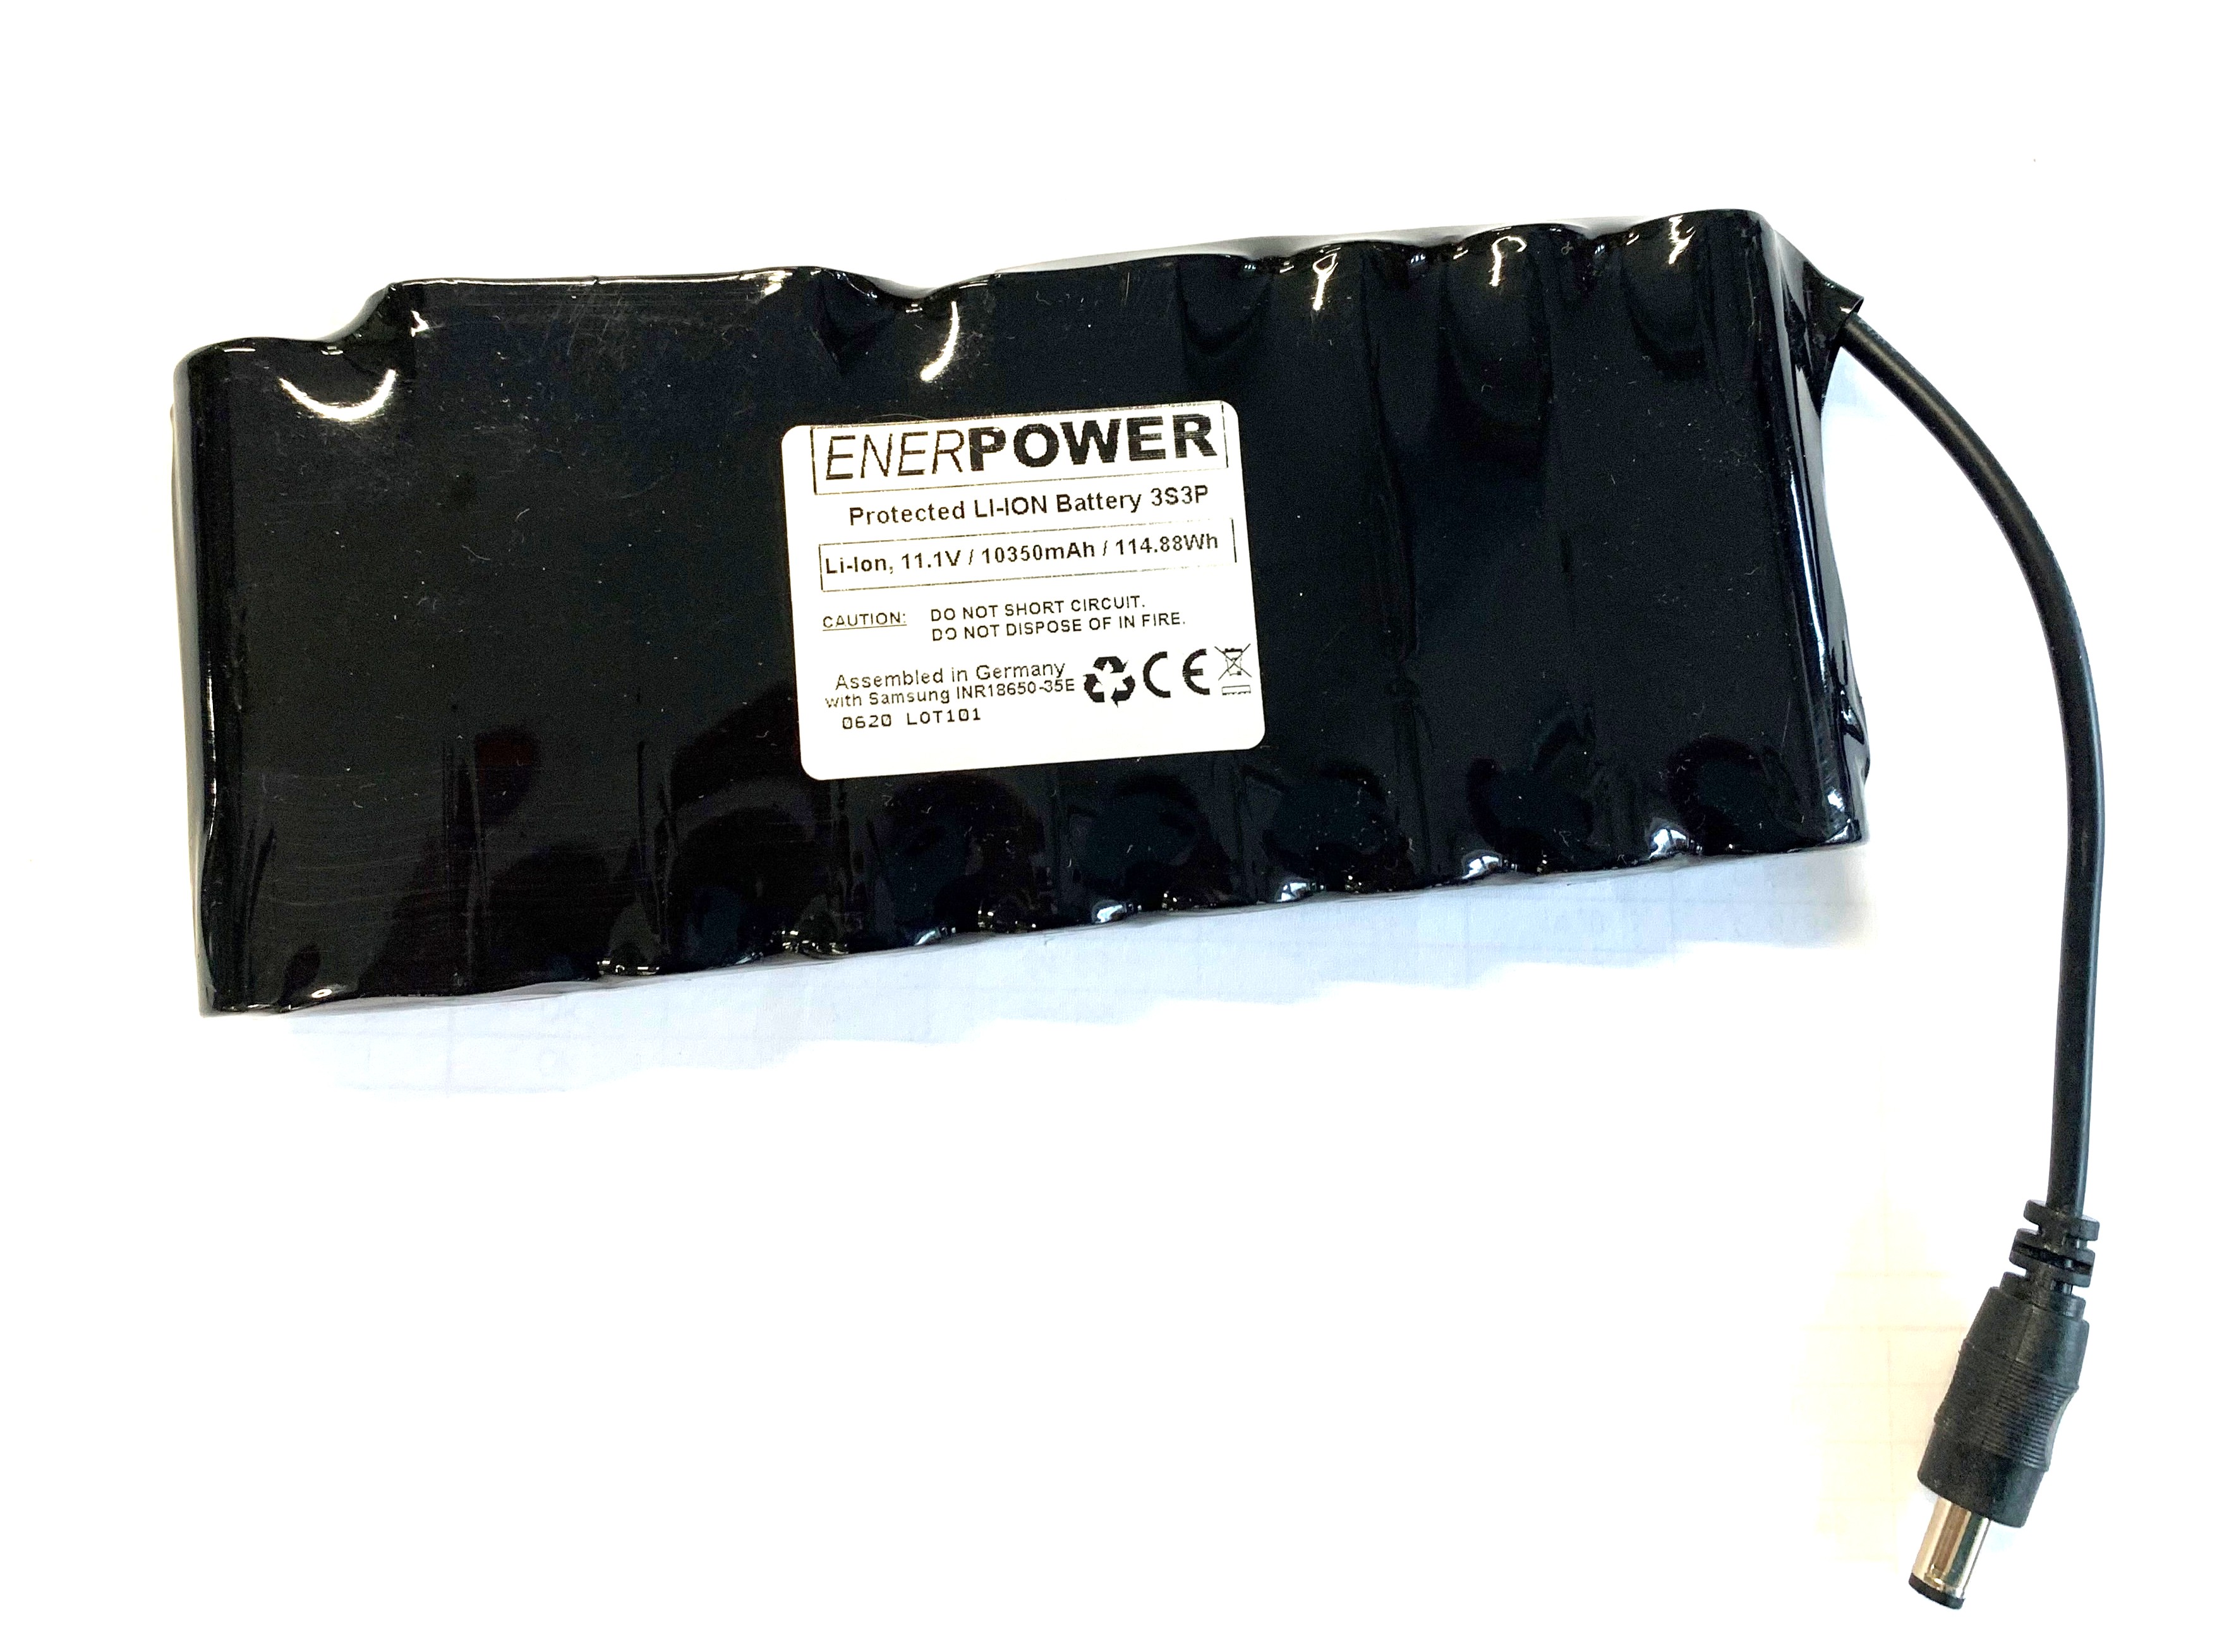 ENERpower 3S3P 11.1V battery (12V) 10.35Ah 115 Wh 9 x 1 